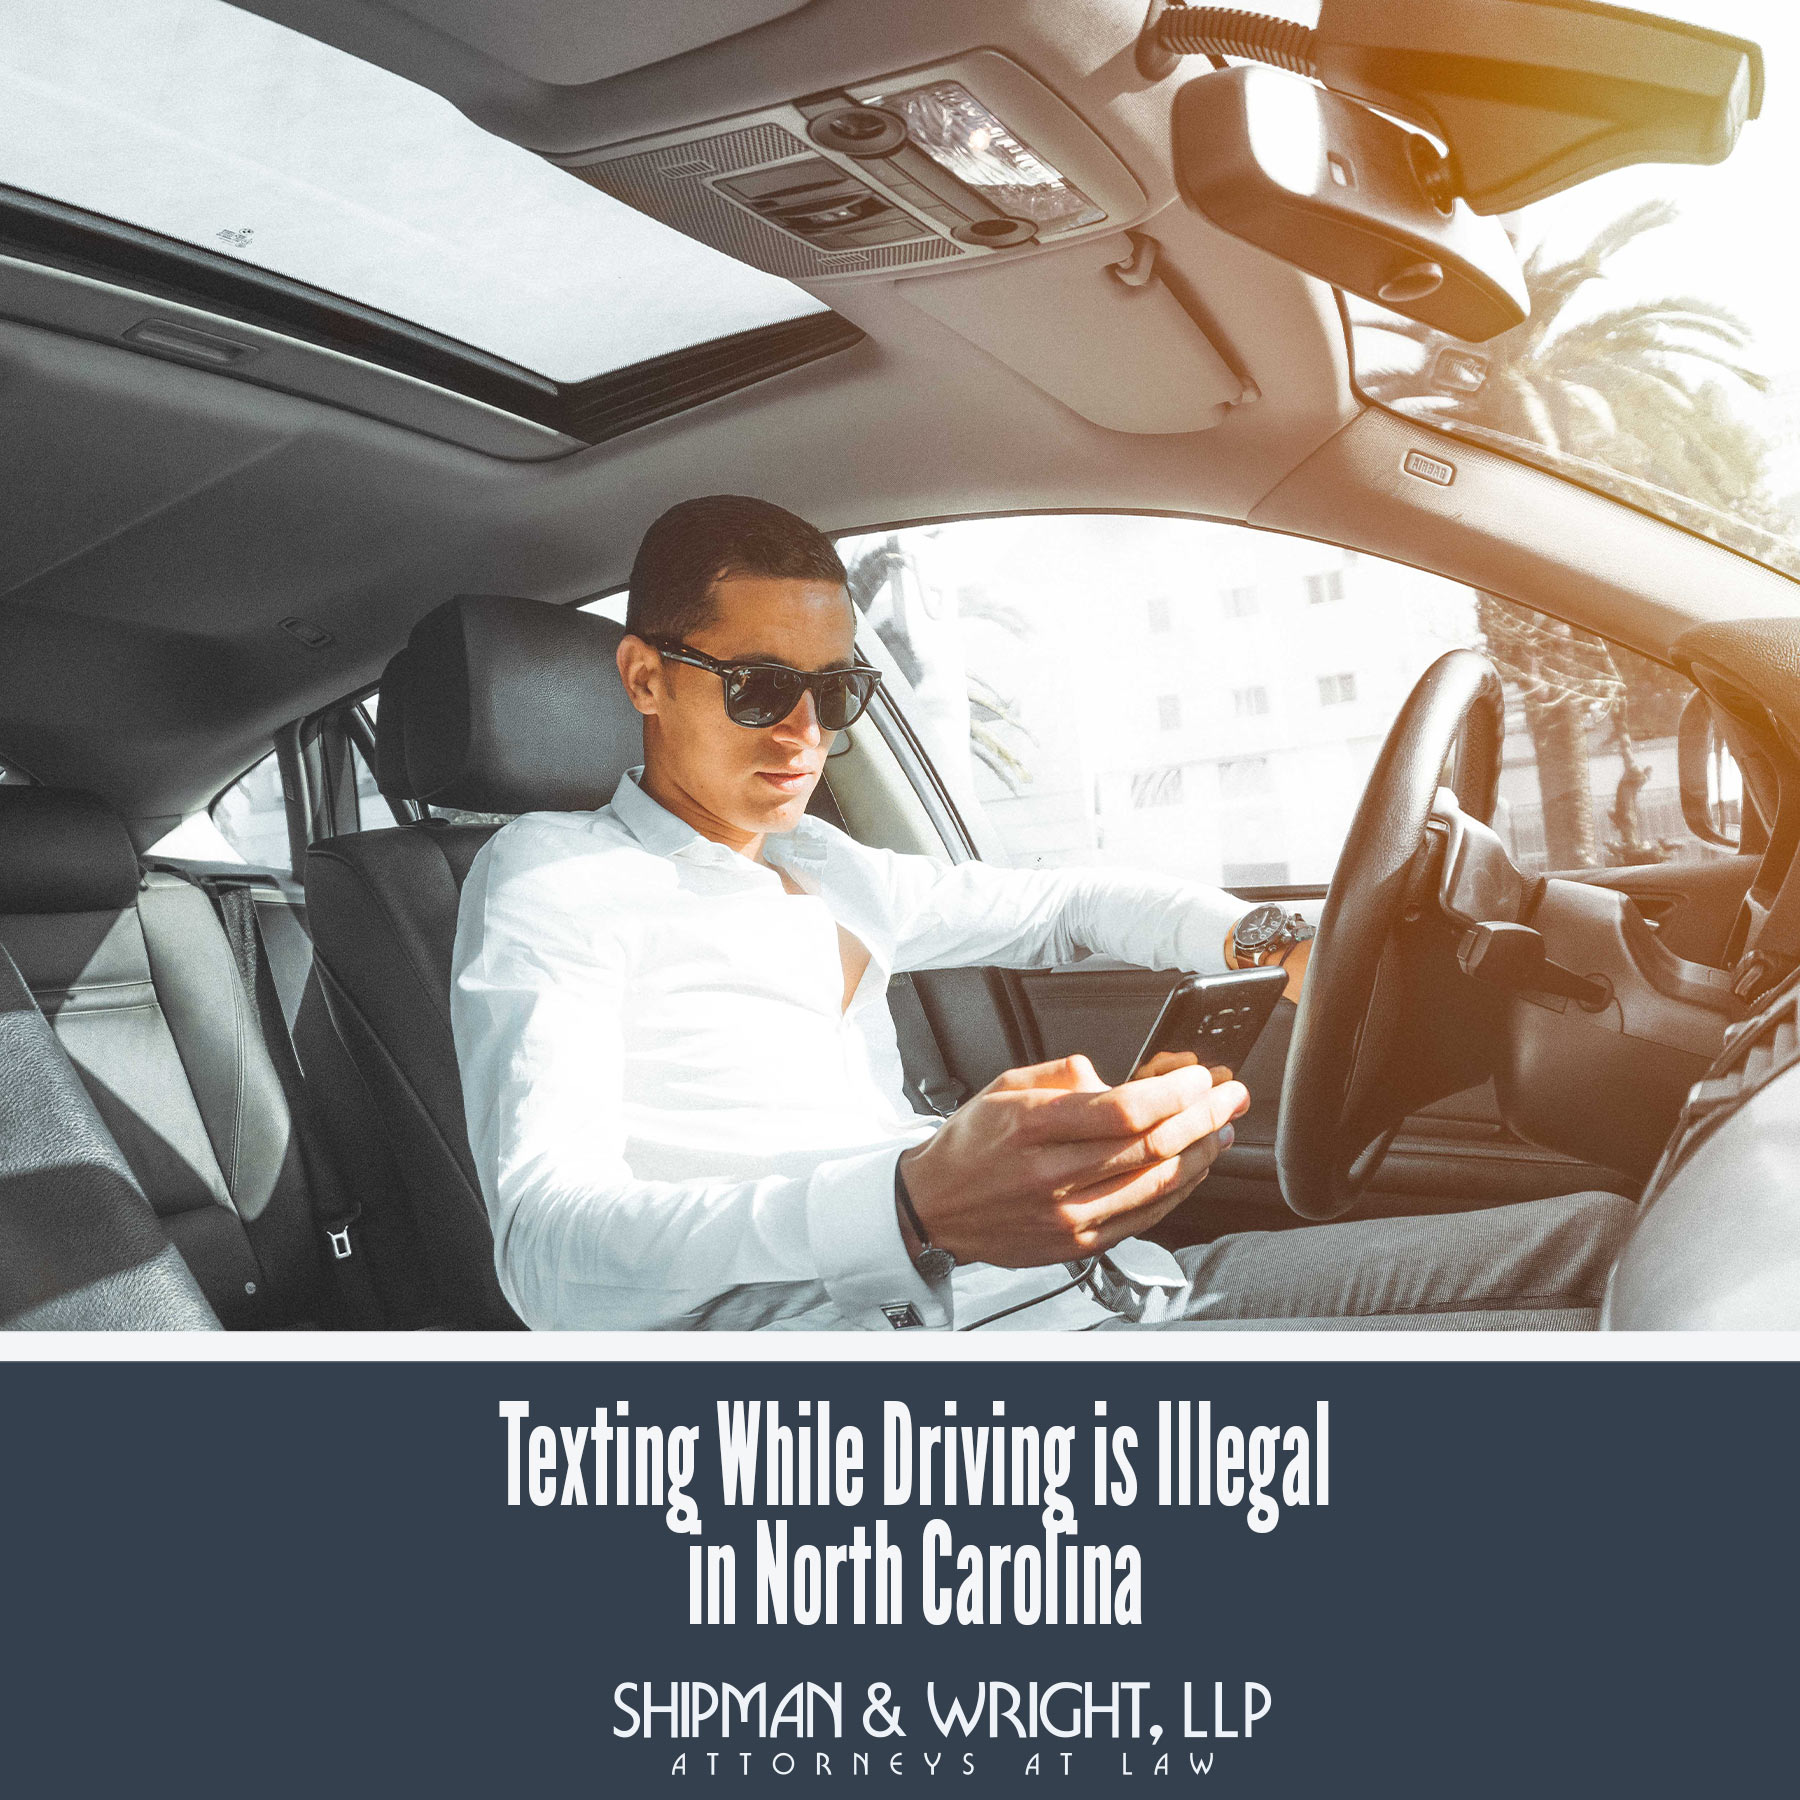 Texting While Driving is Illegal in North Carolina